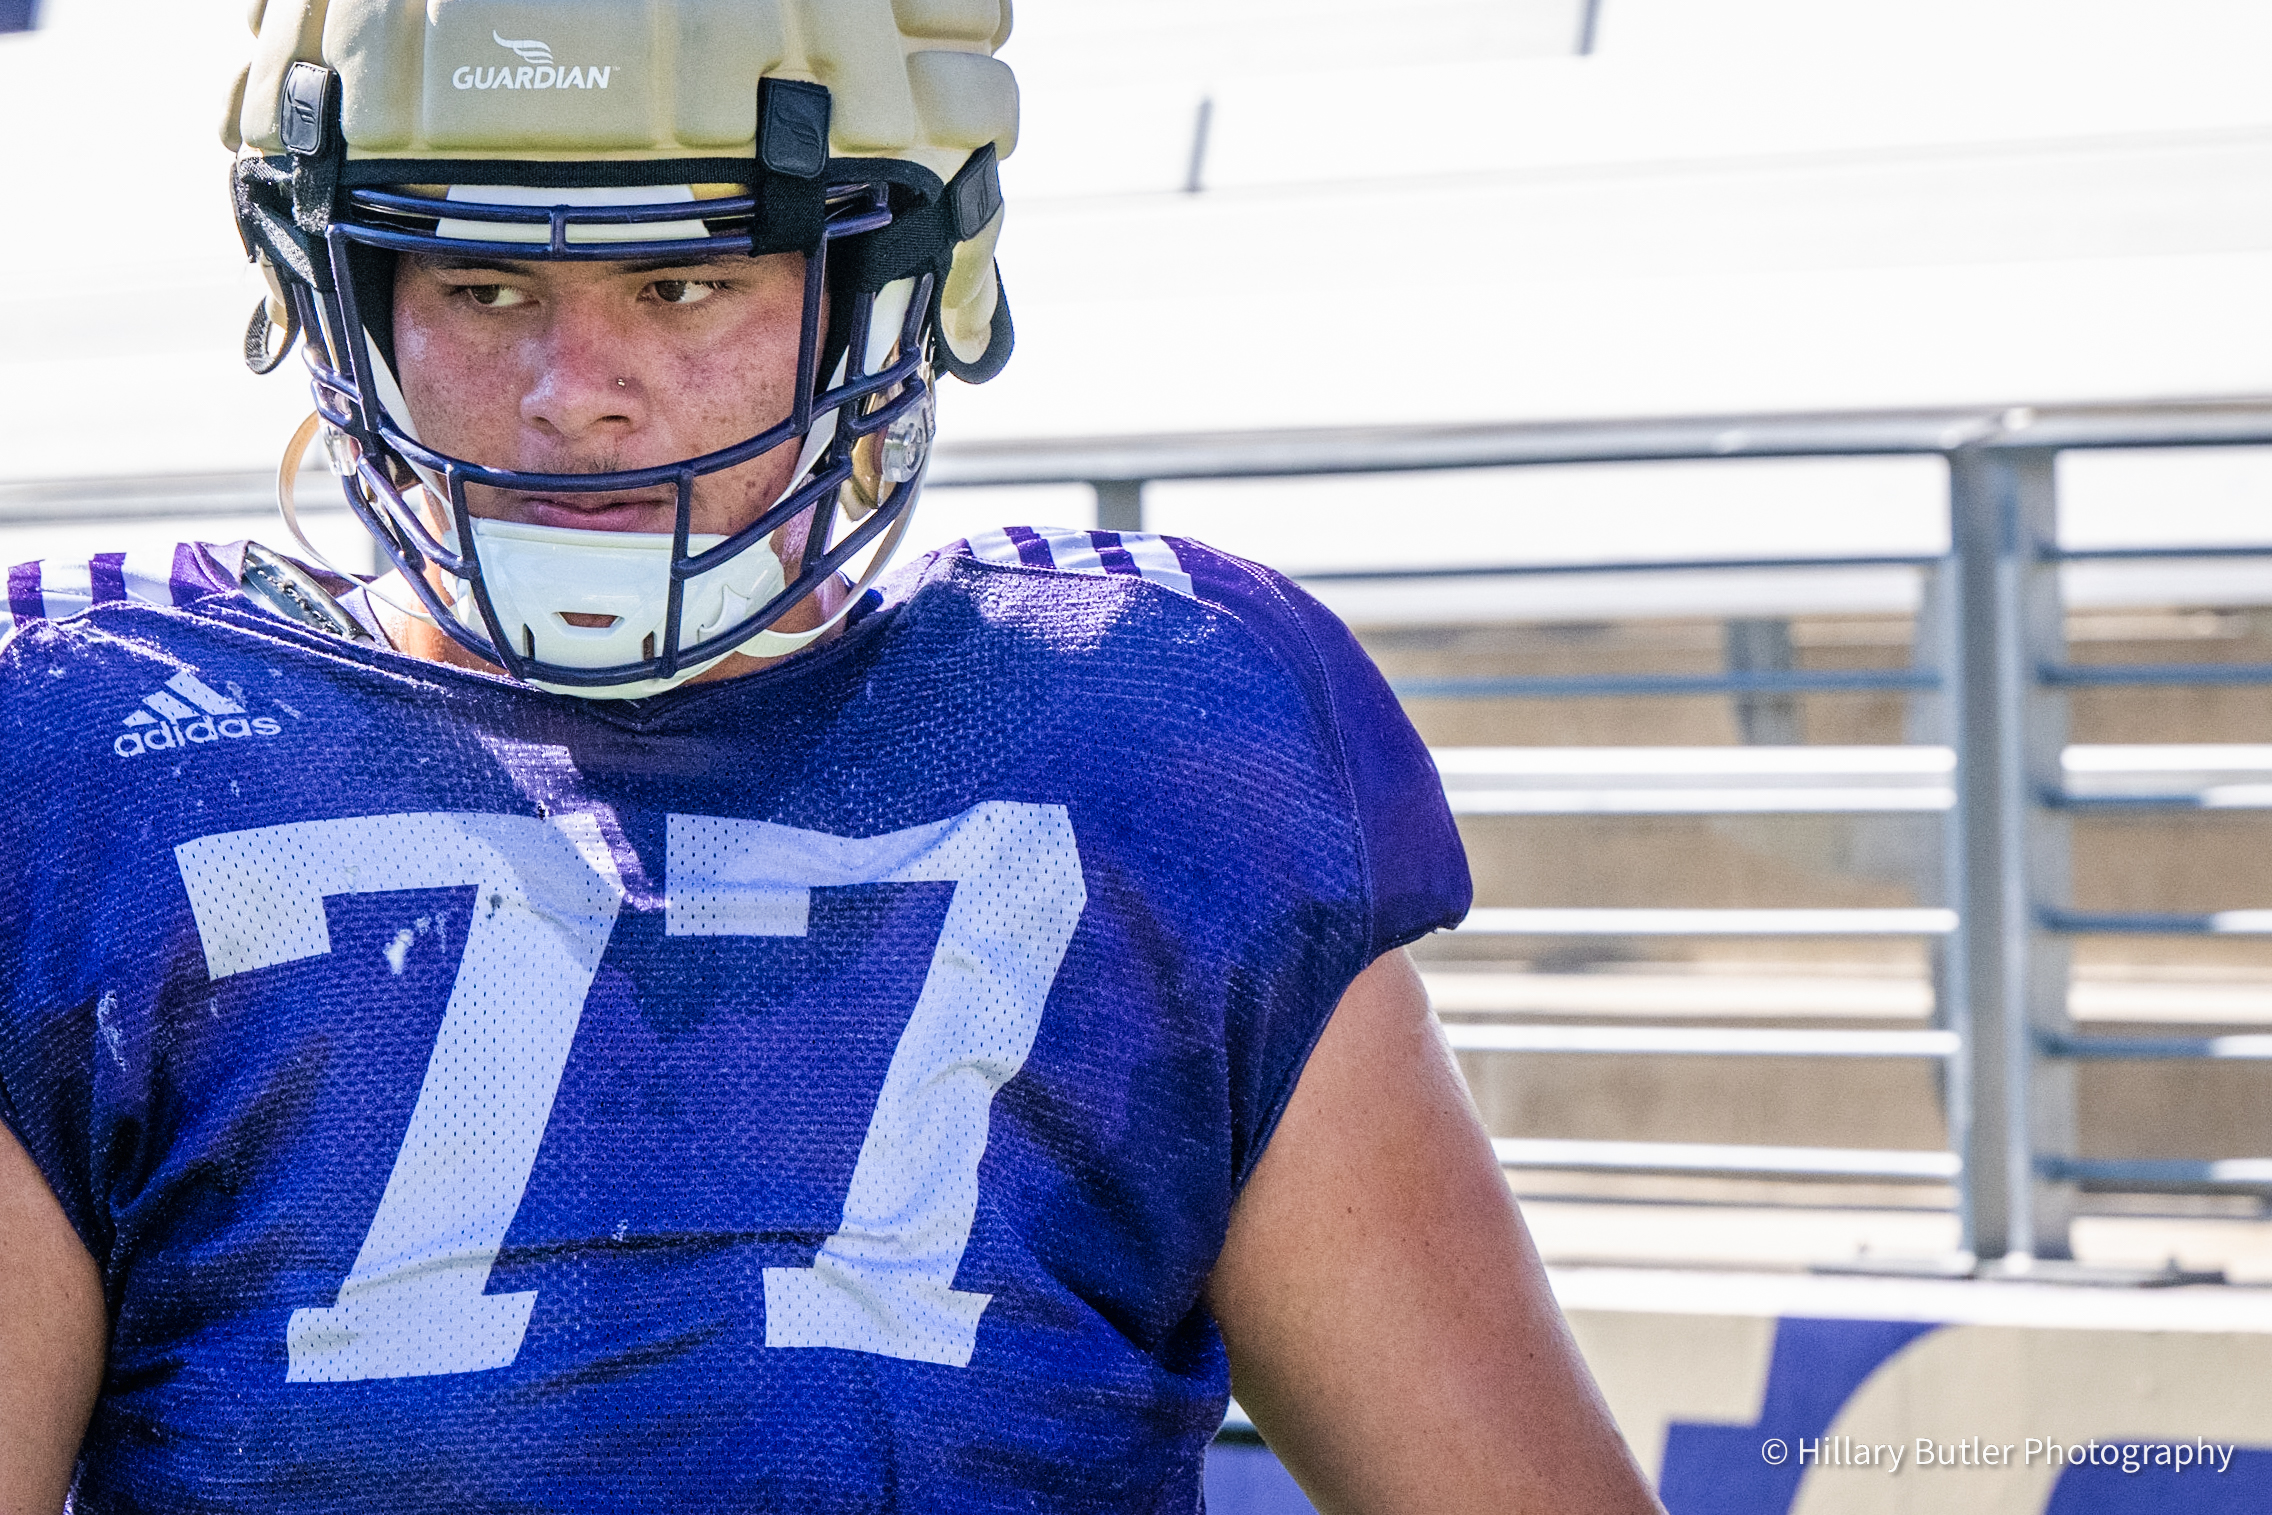 What Will Be Washington’s Best Position This Spring?